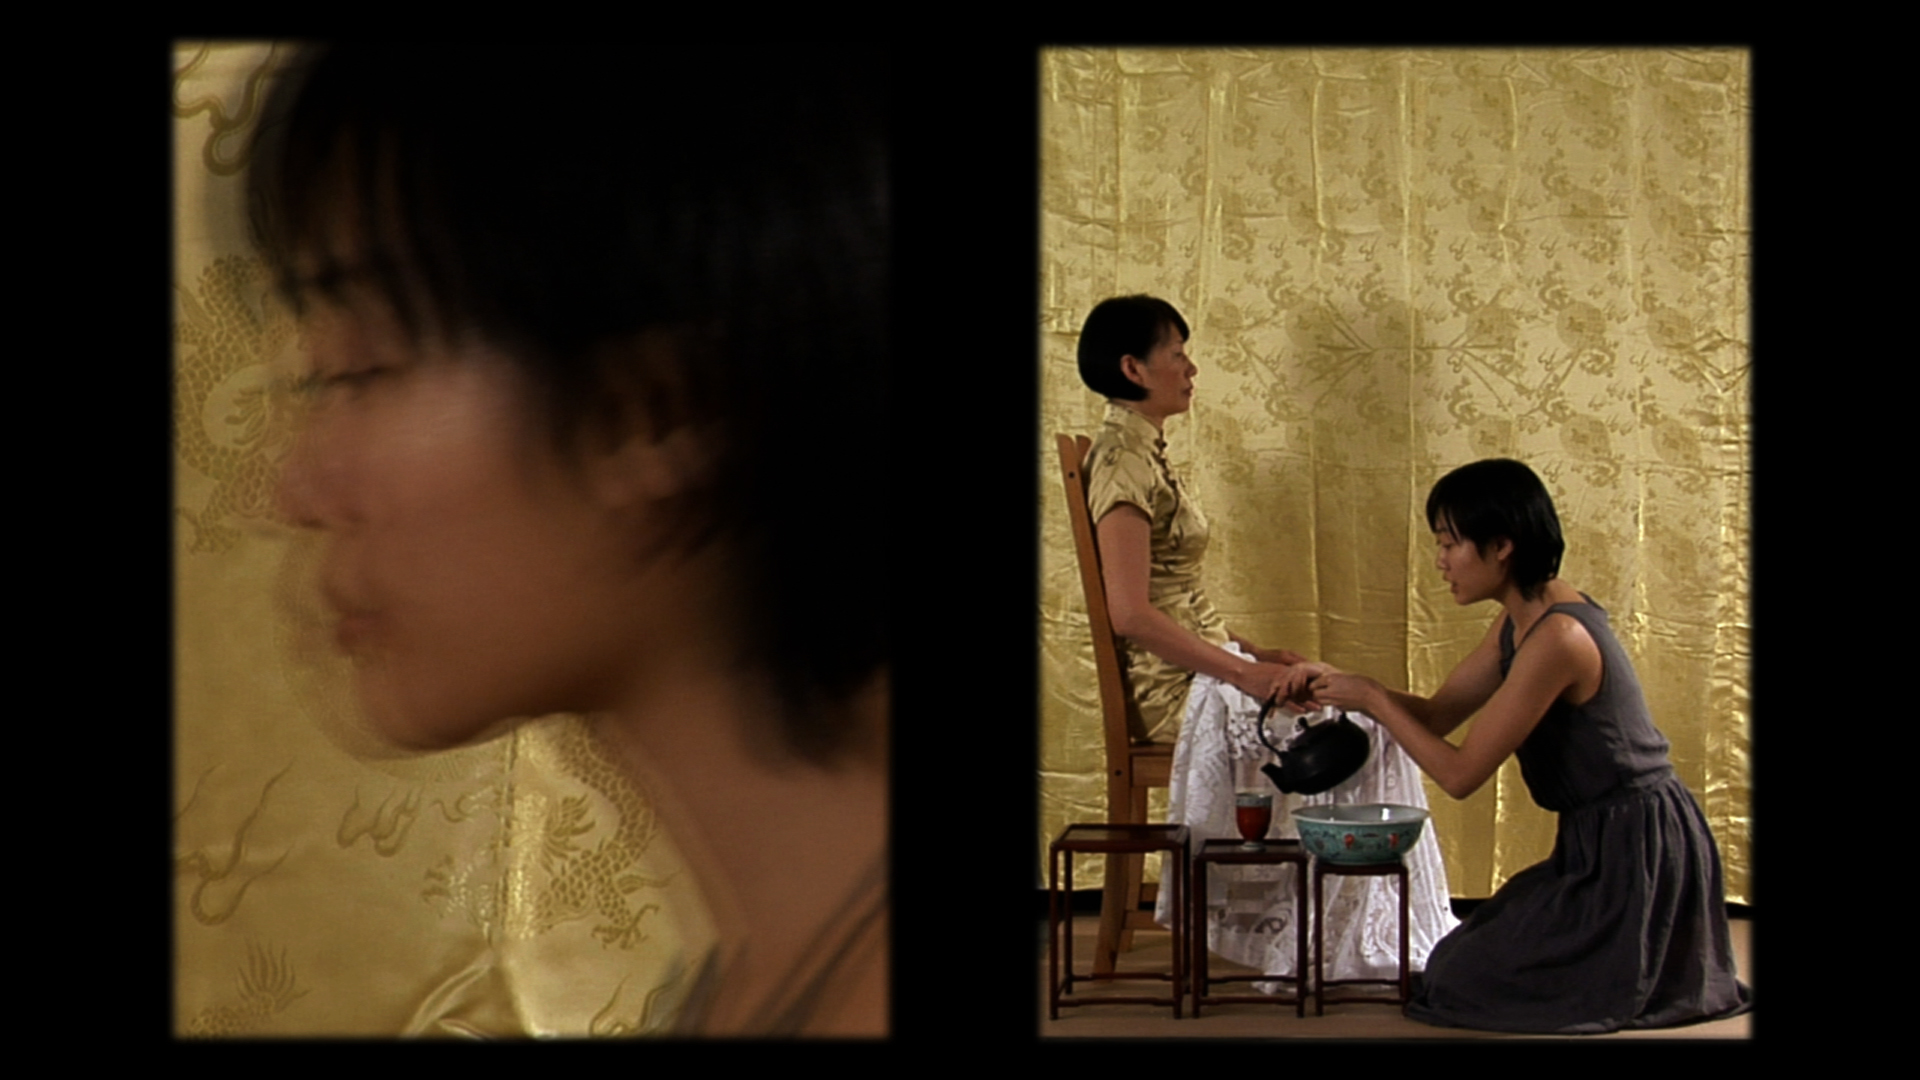 The women we want to be [mi cha] (2009) by Annie Onyi Cheung